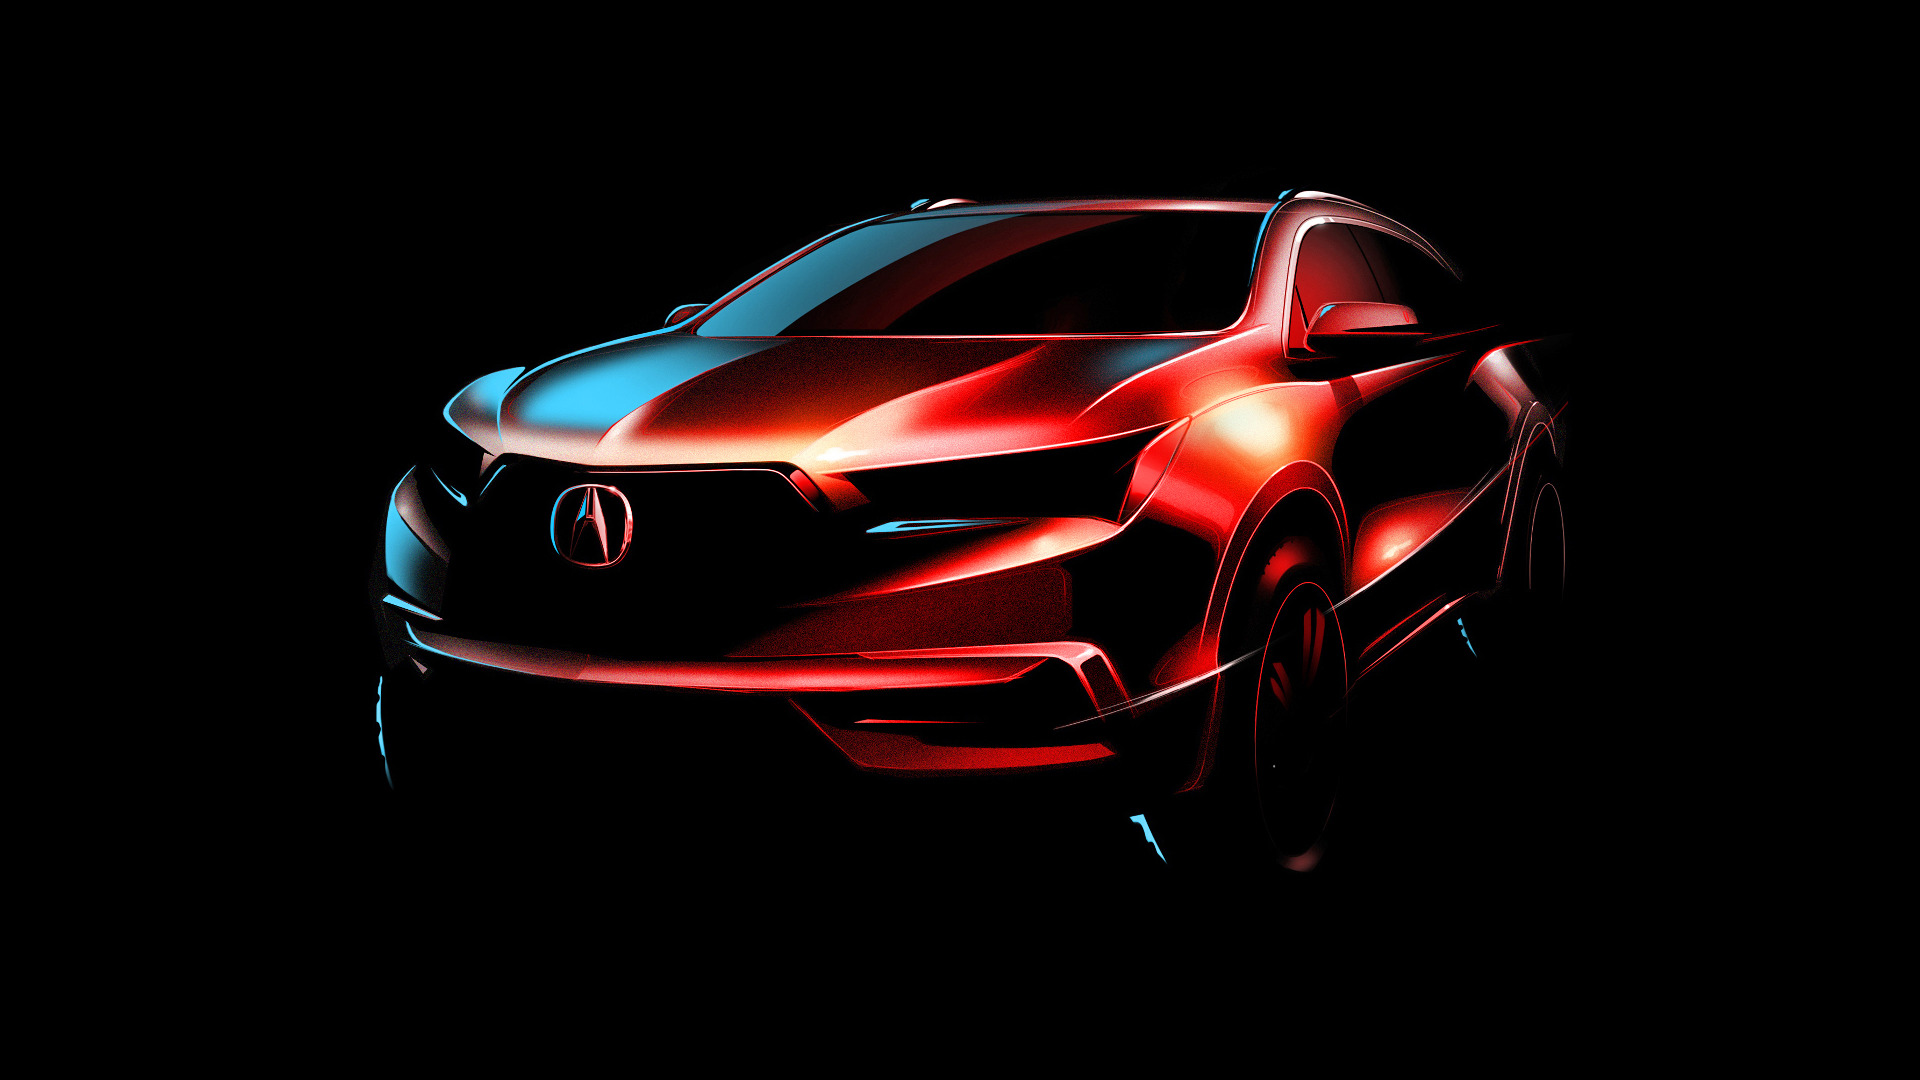 Acura Mdx Car Vehicle Suv Concept Art Simple Background Wallpapers Hd Desktop And Mobile Backgrounds